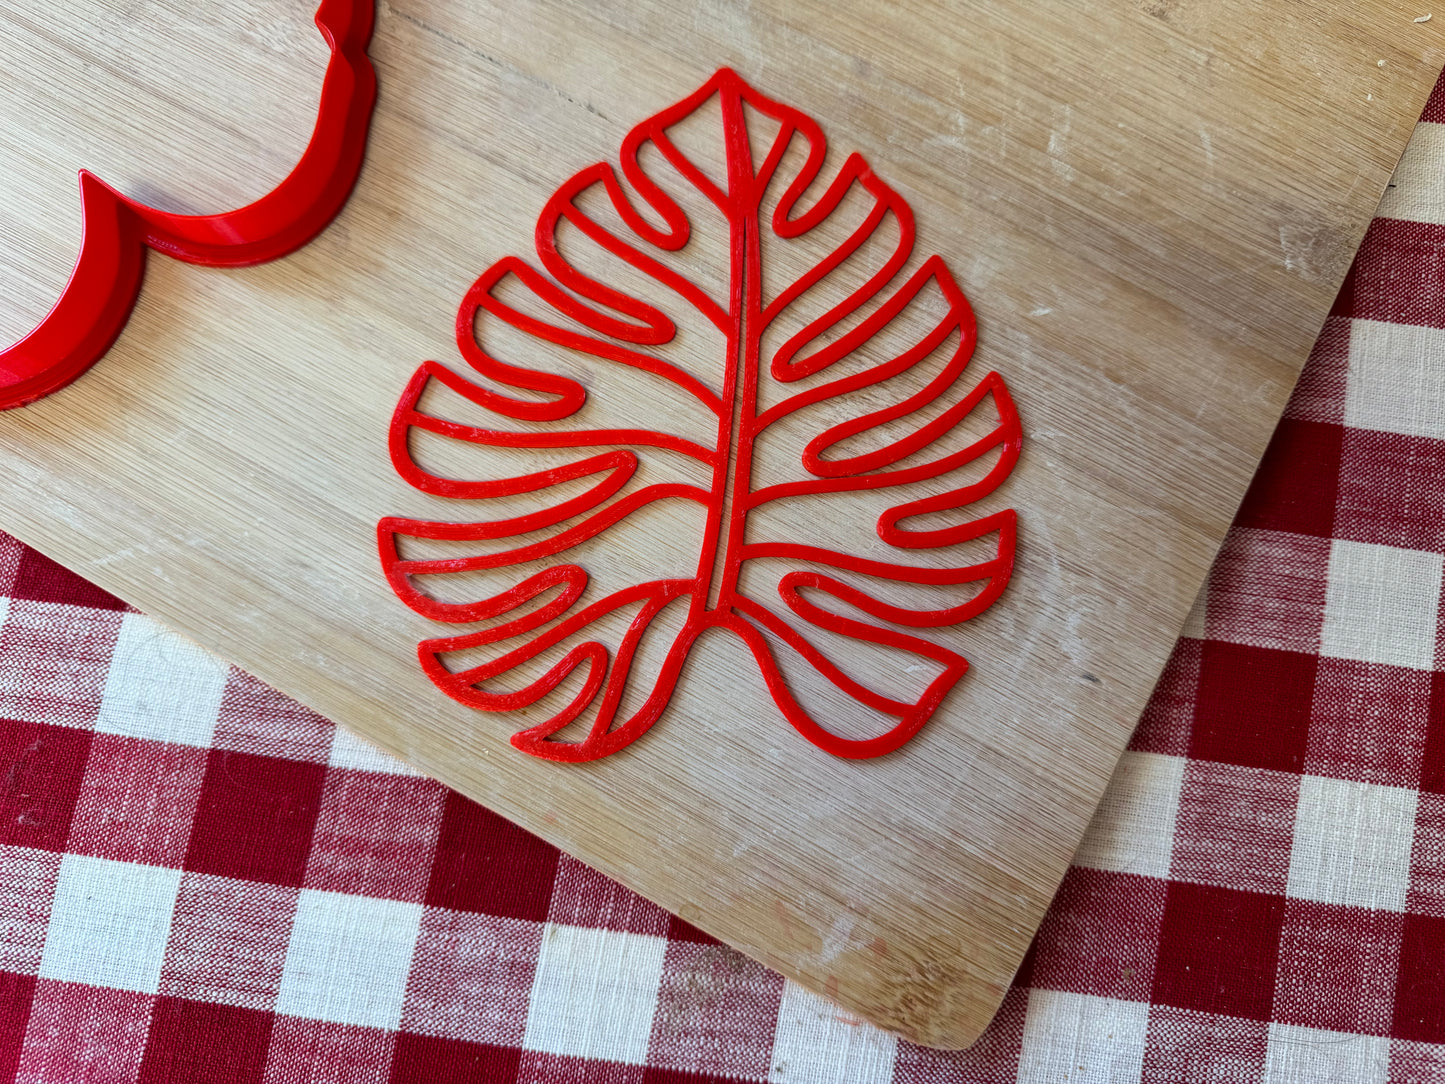 Monstera Design, Pottery Stamp or Stencil w/ optional cutter - plastic 3d printed, multiple sizes available